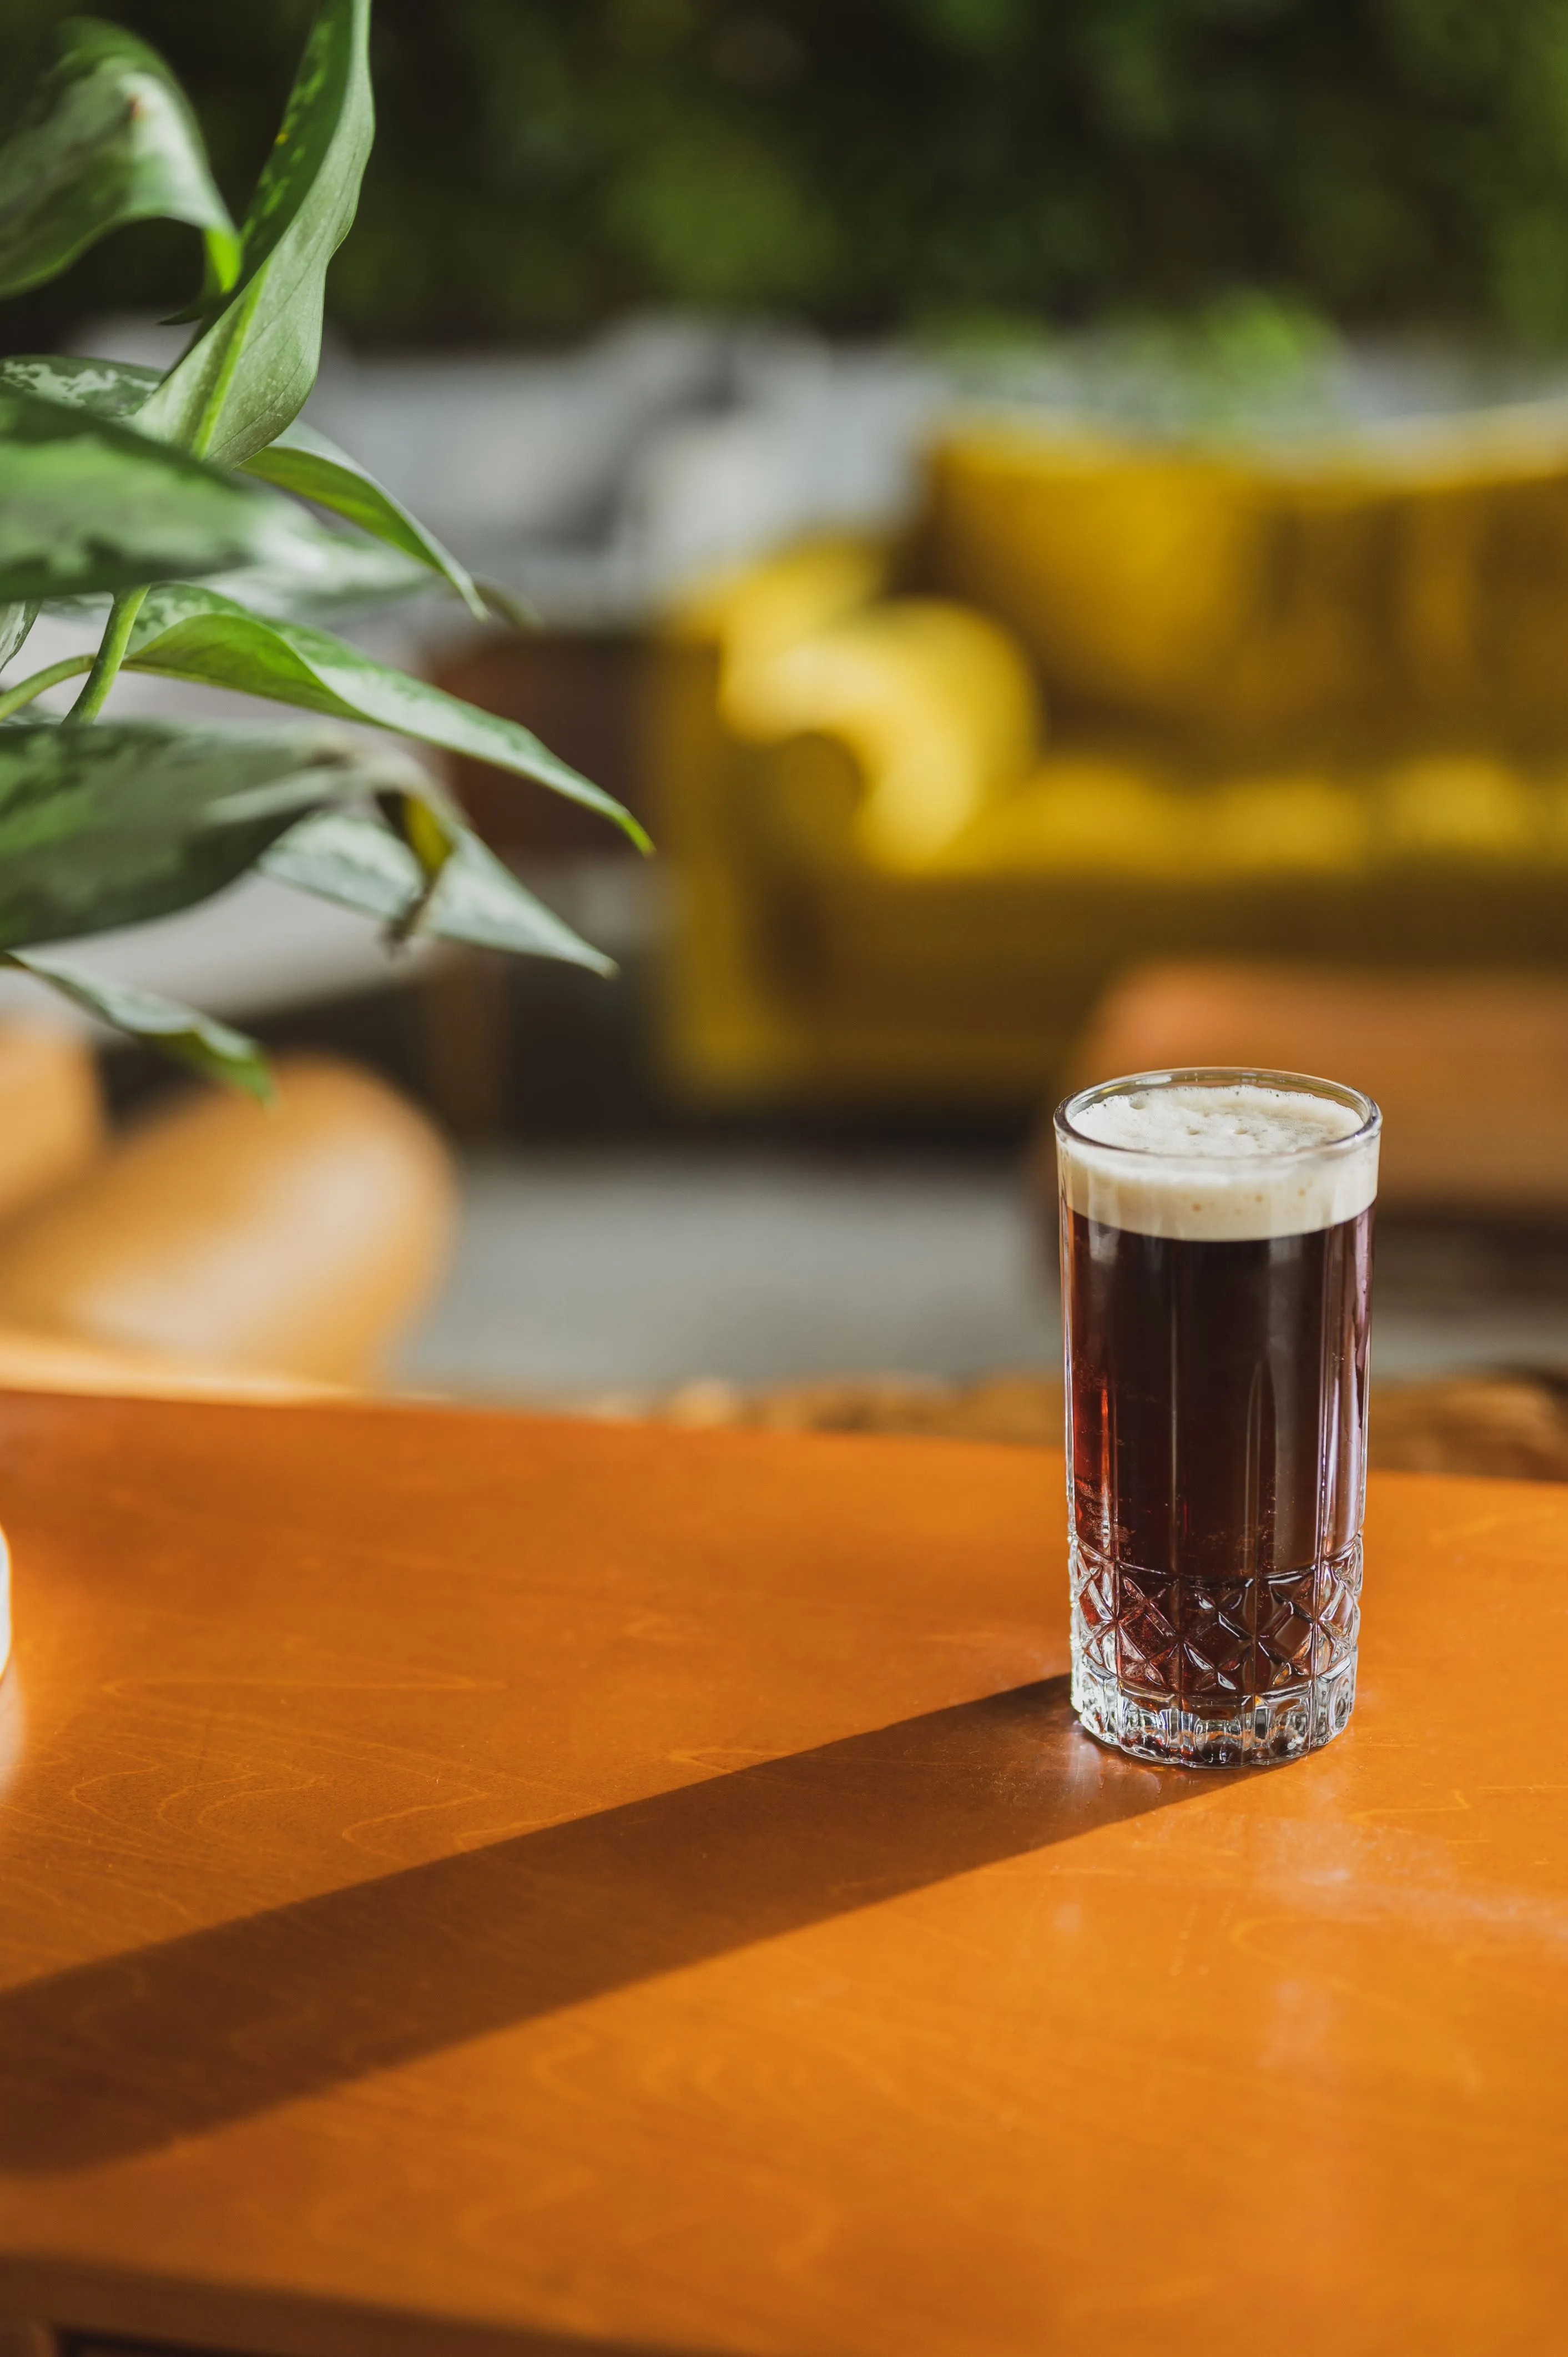 A glass of dark beer on a wooden table with a blurred background of indoor plants and a yellow sofa.